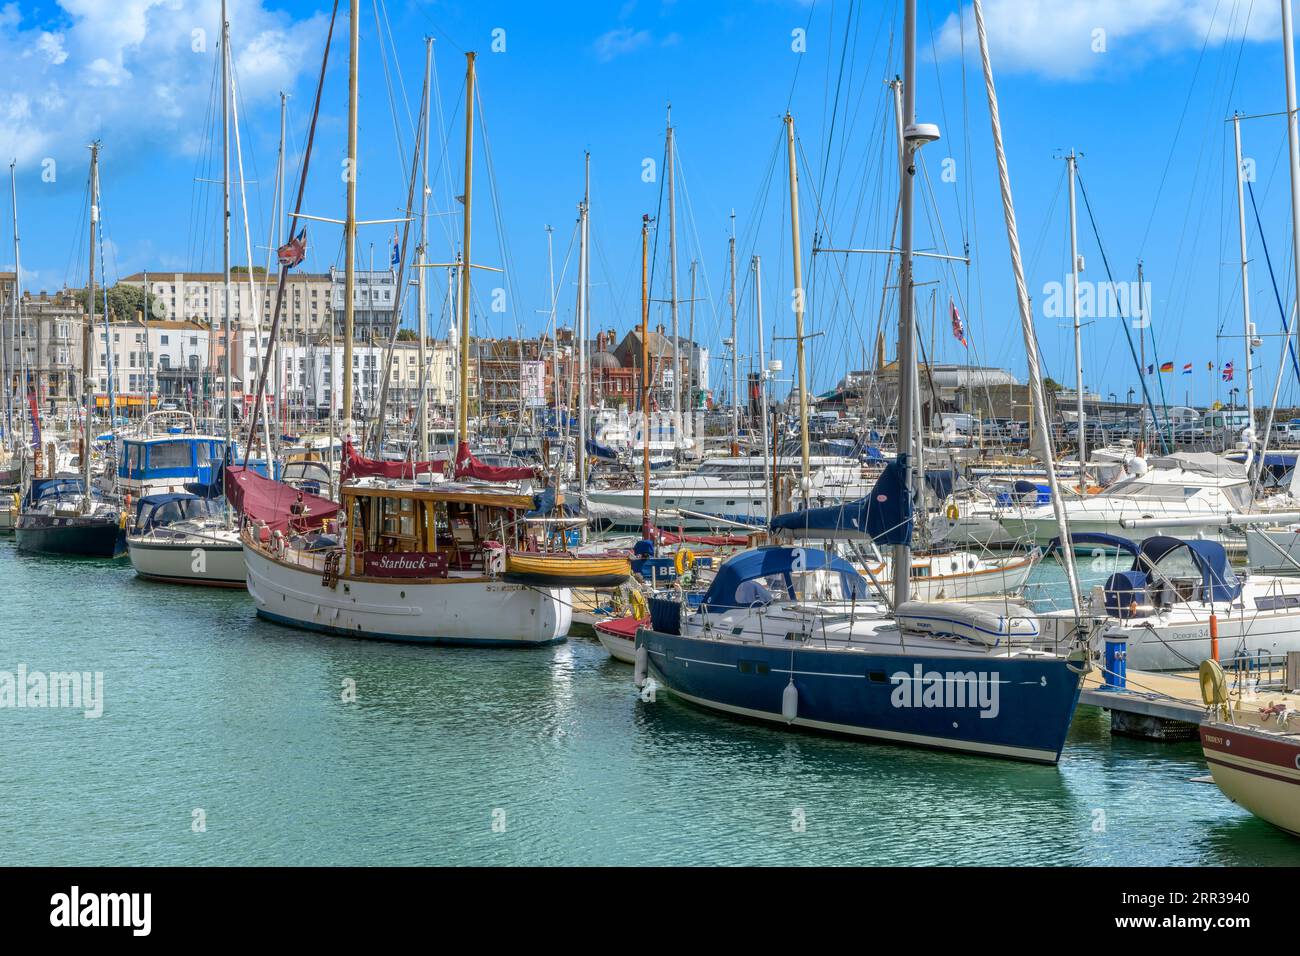 Mid day at Ramsgate Yacht Marina. With fishing boats, yachts, little boats and speed boats. Bright blue skies and reflections on the sea. Stock Photo